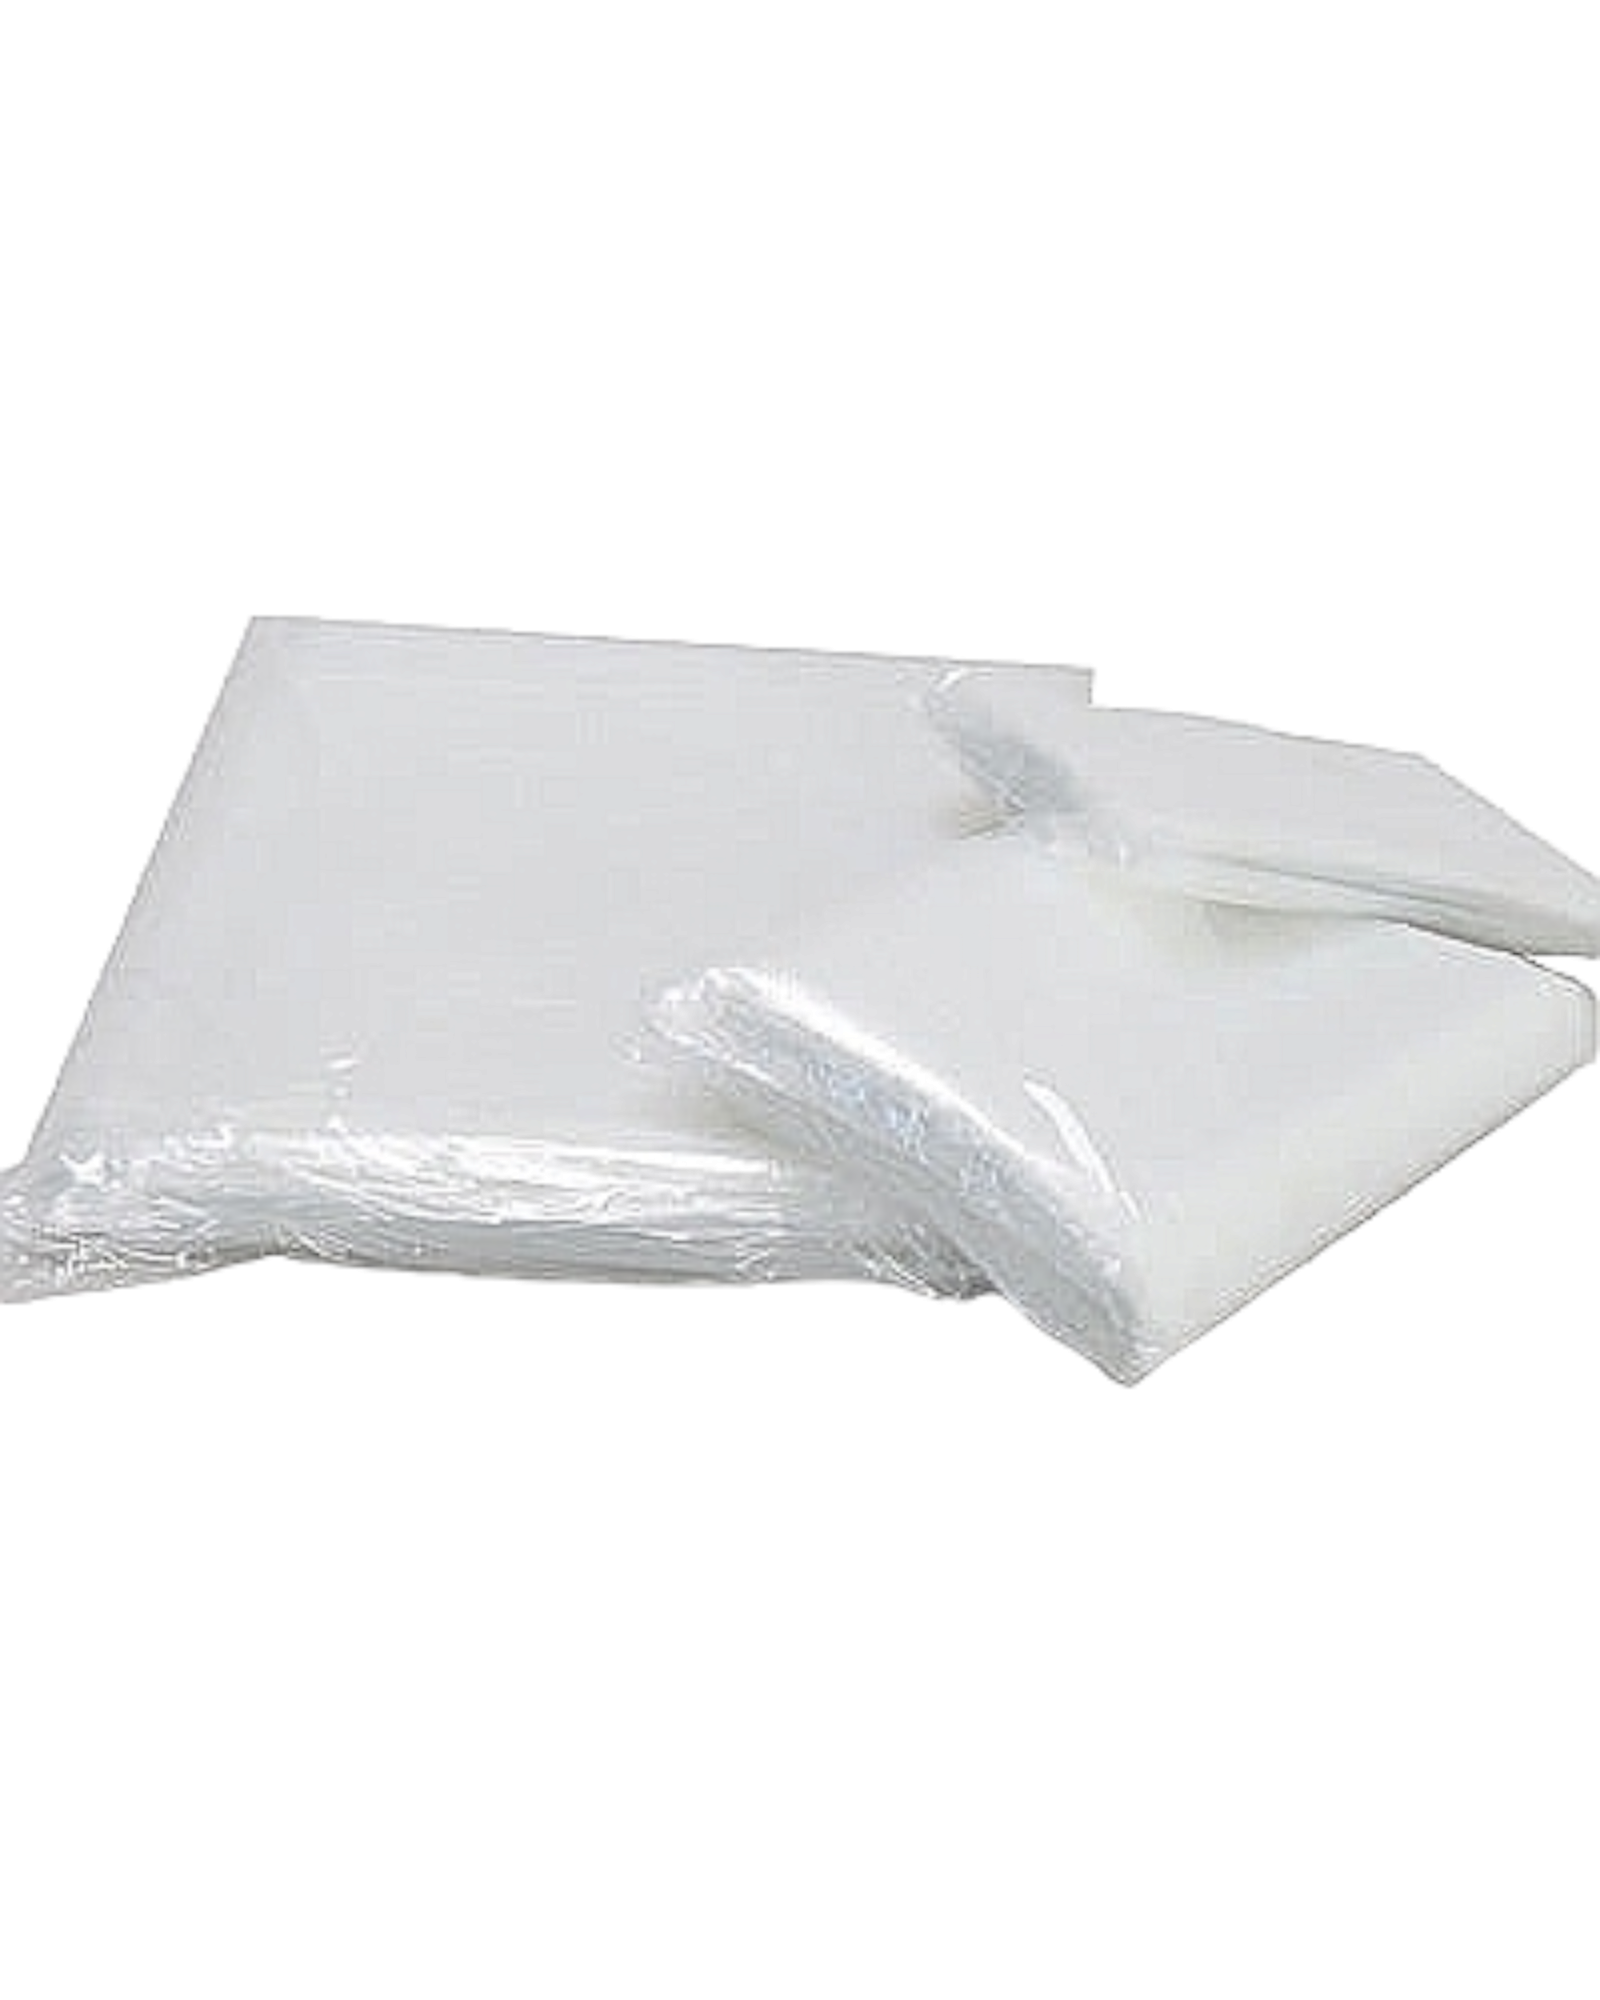 Meat Bag 150x250mm 50mic Clear 500g 250pack